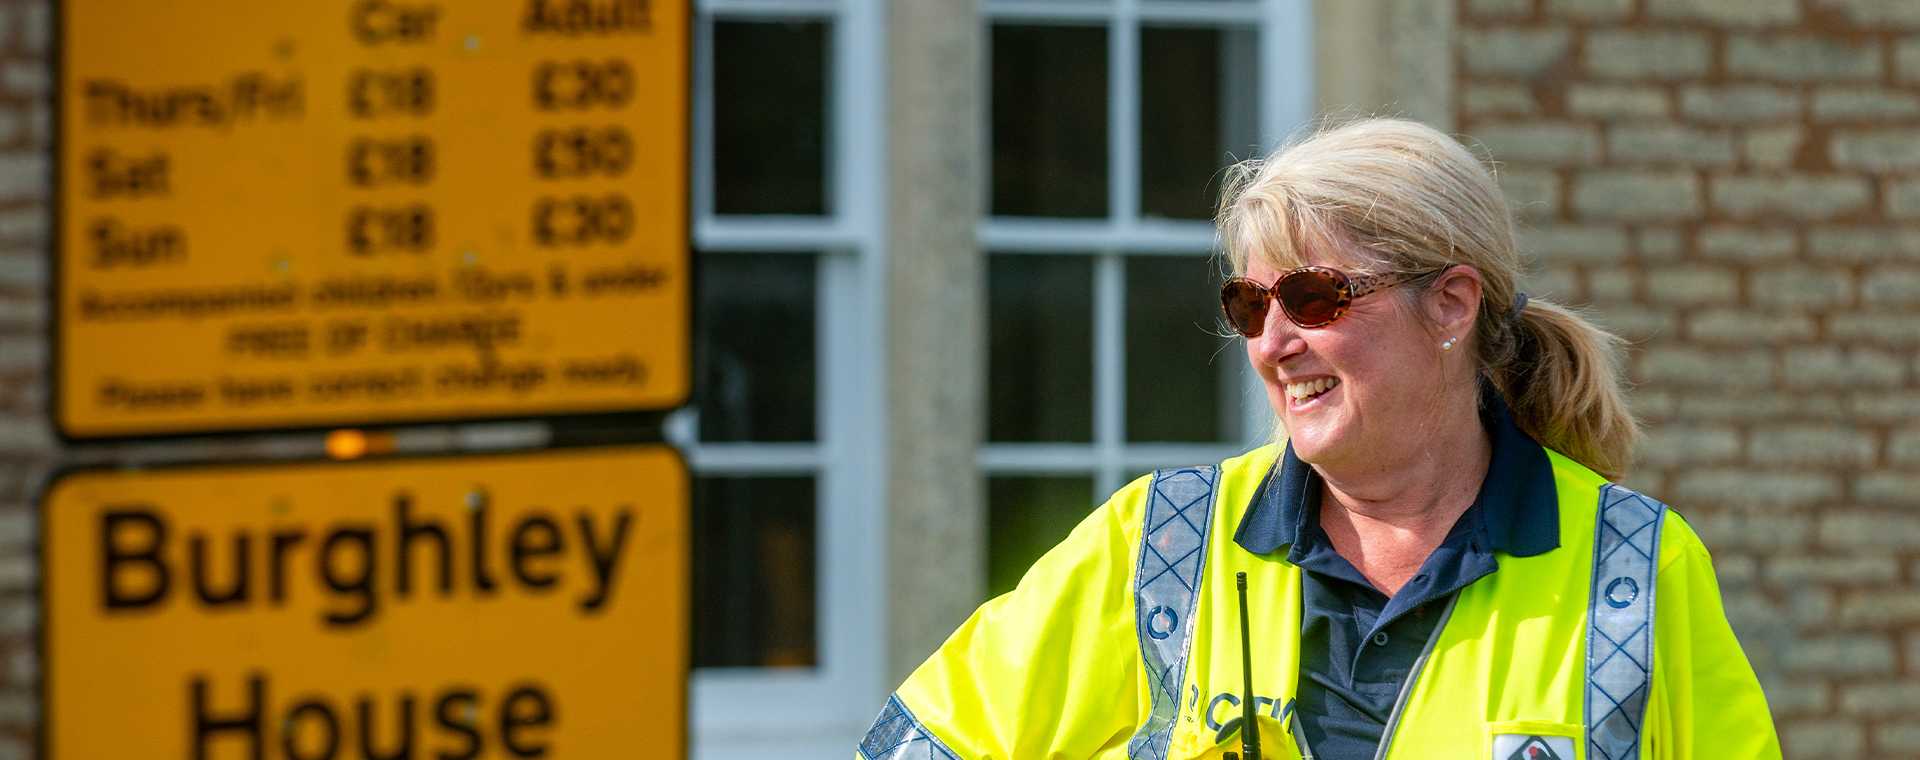 A Tracis Events Marshal